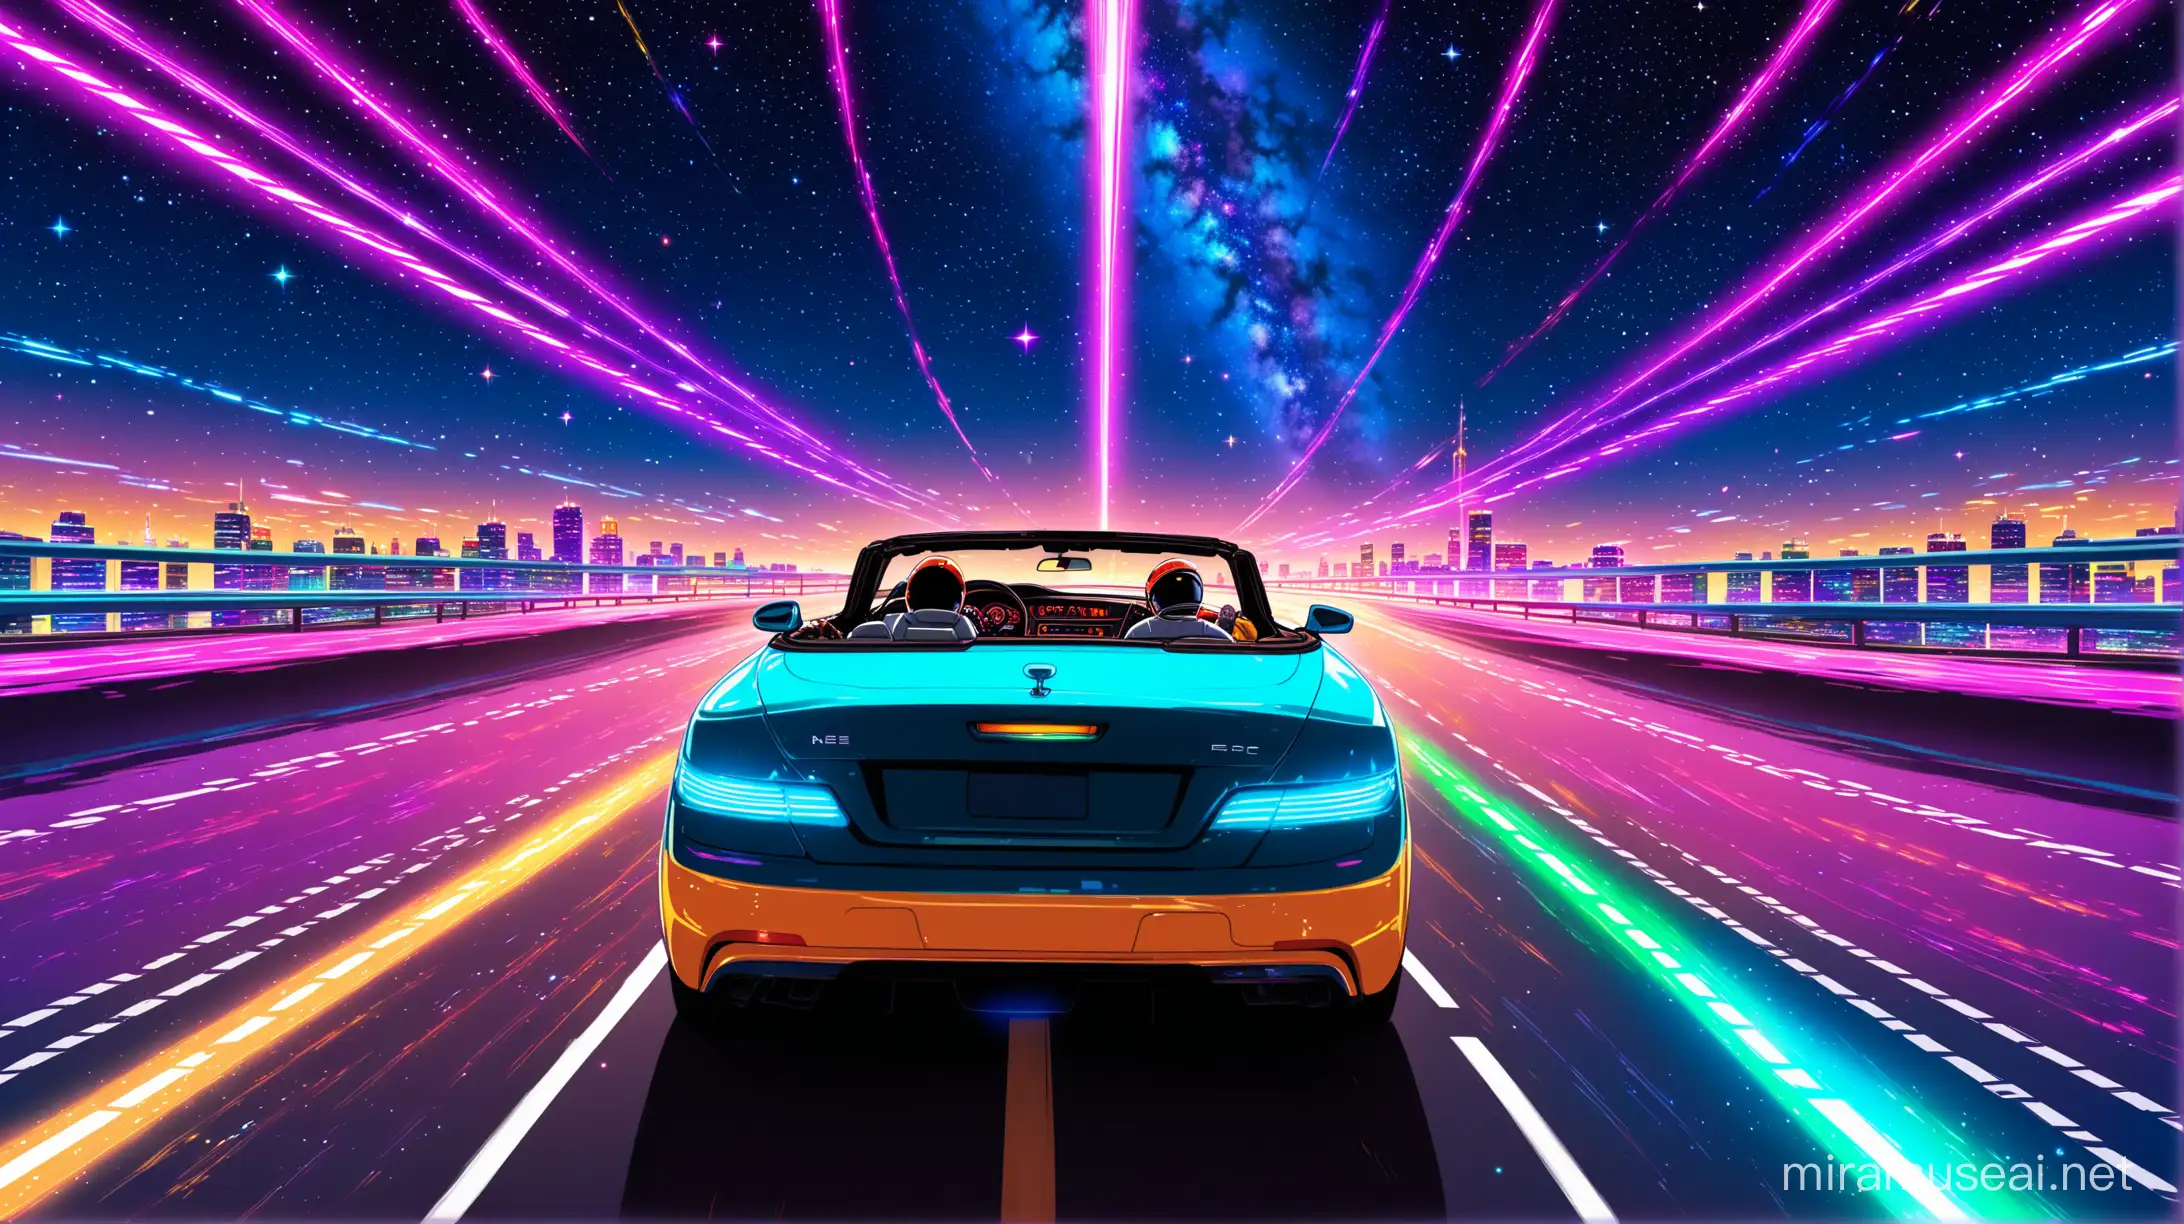 a man in space suit drinving a convertible car in a spacial highway at highspeed, surrounded by stars, a lots of colors, neons, buildings